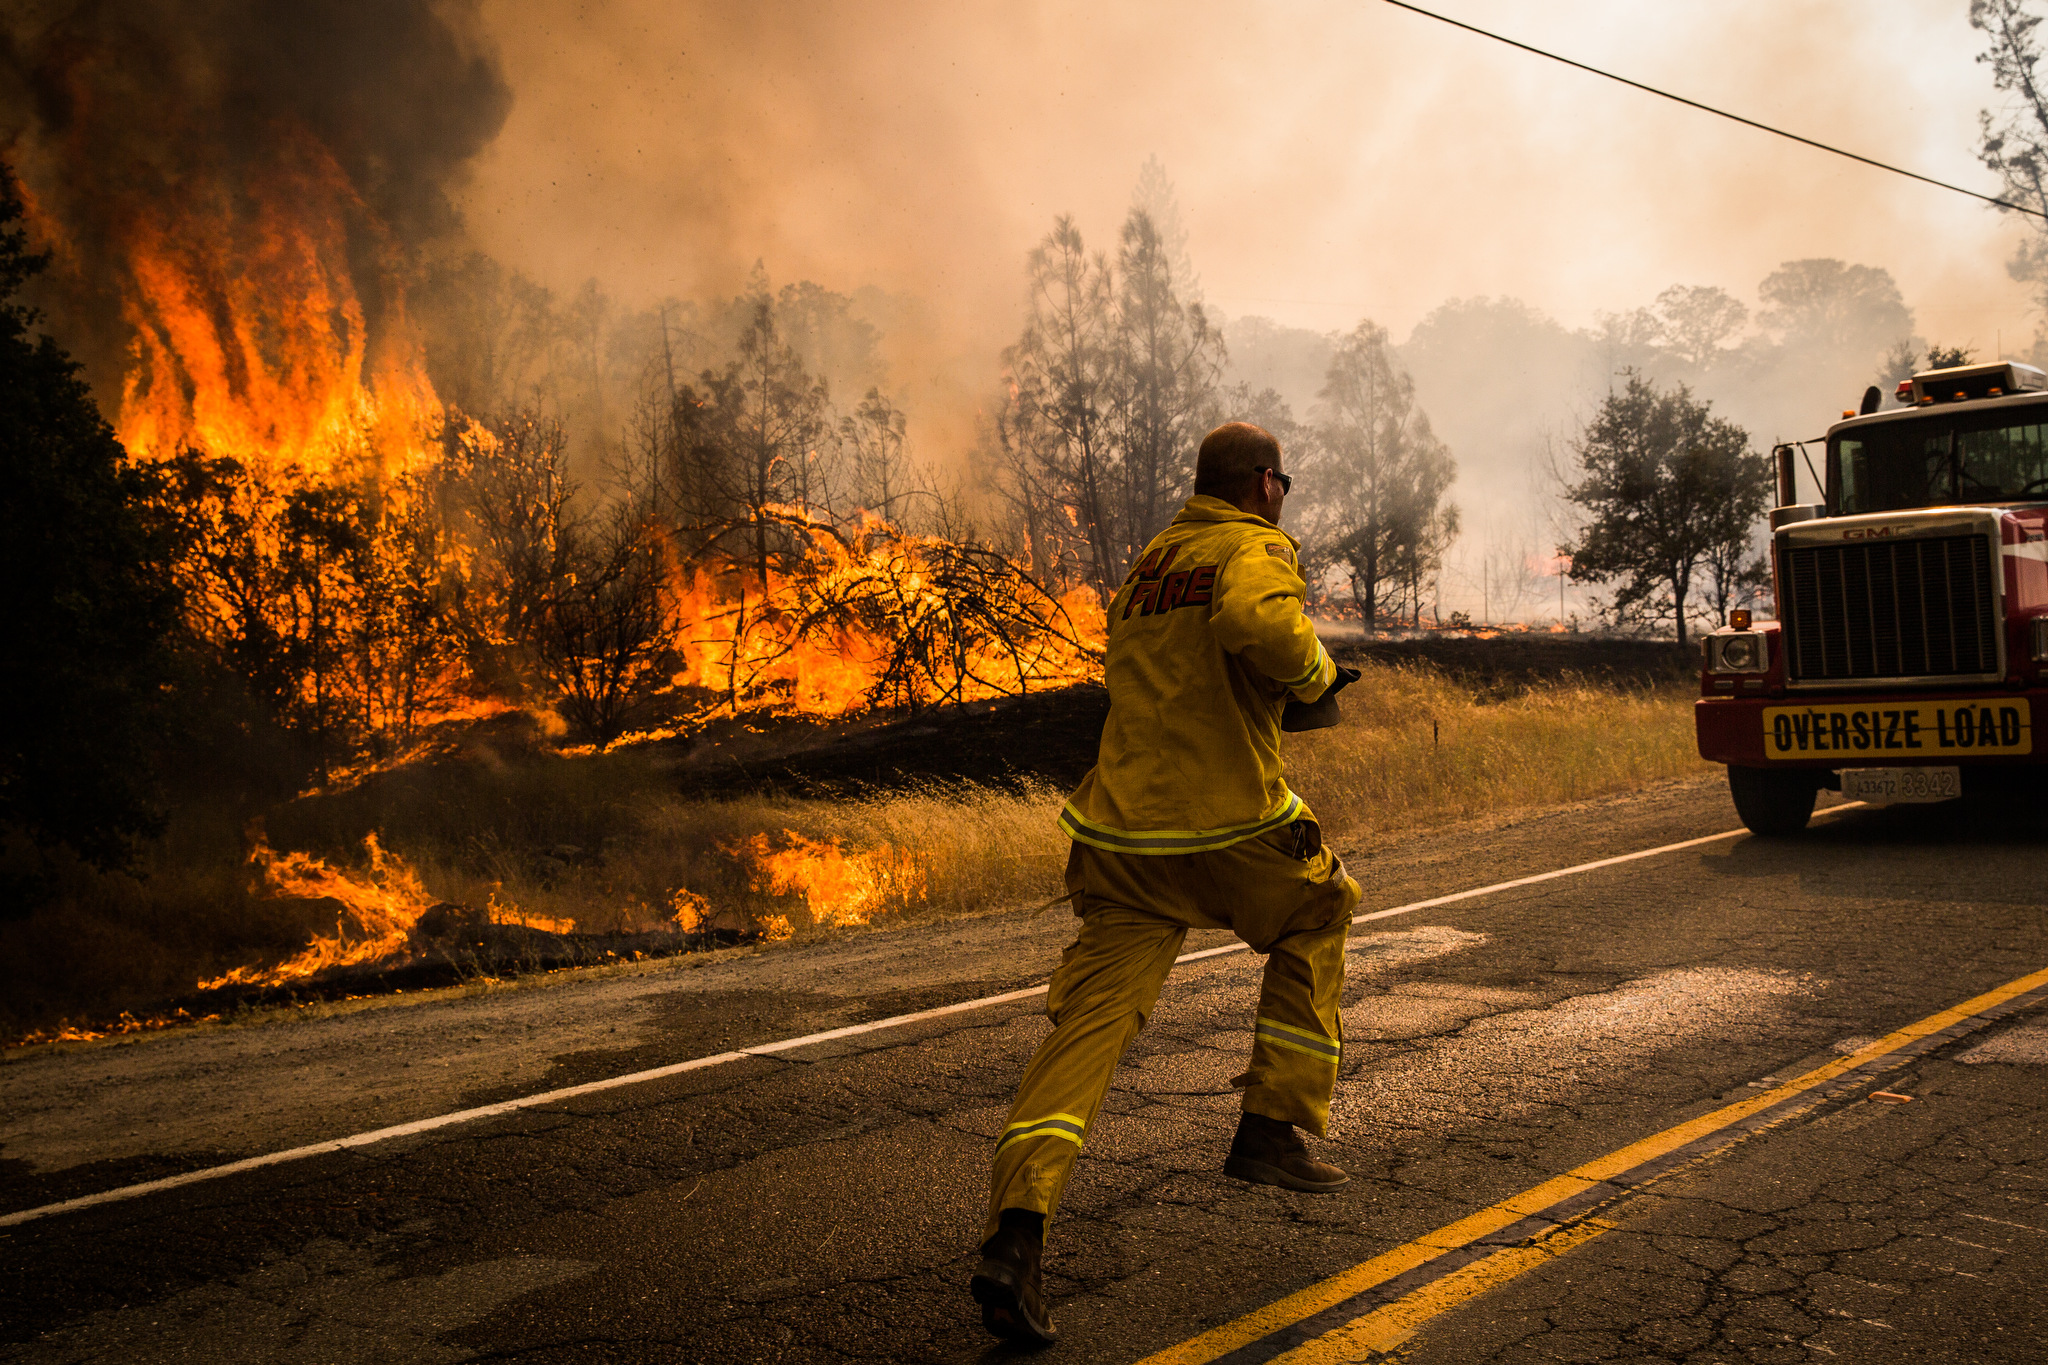  A firefighter runs to move a truck before it's overrun by a spot fire on the Rocky Fire in Lake County, California on July 30, 2015. As of August 5, the fire had consumed 69,600 acres and is one of 23 wildfires burning in California. 